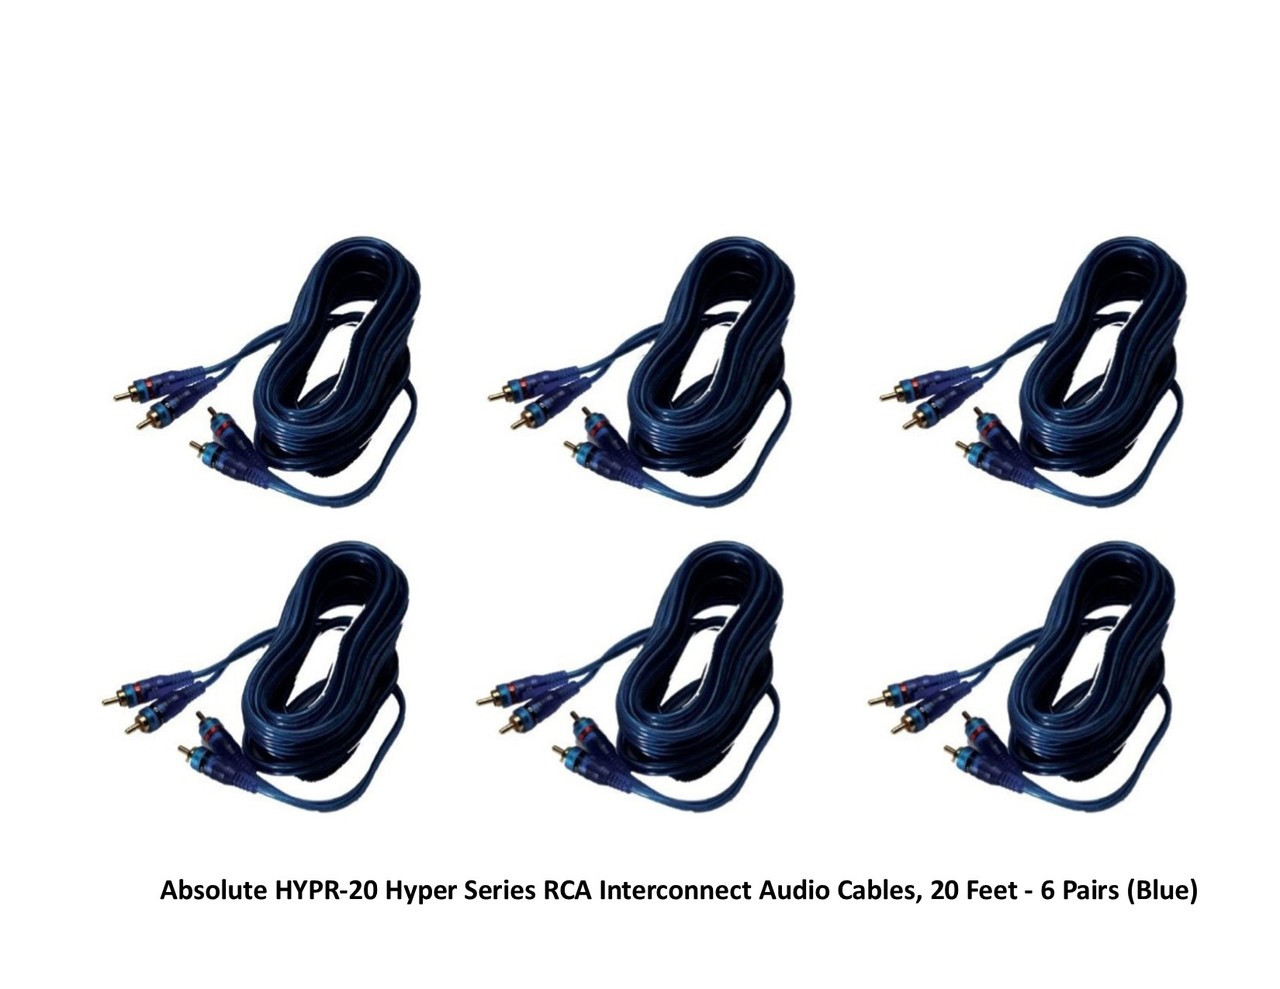 Absolute HYPR-20 Hyper Series RCA Interconnect Audio Cables, 20 Feet - 6 Pairs (Blue)